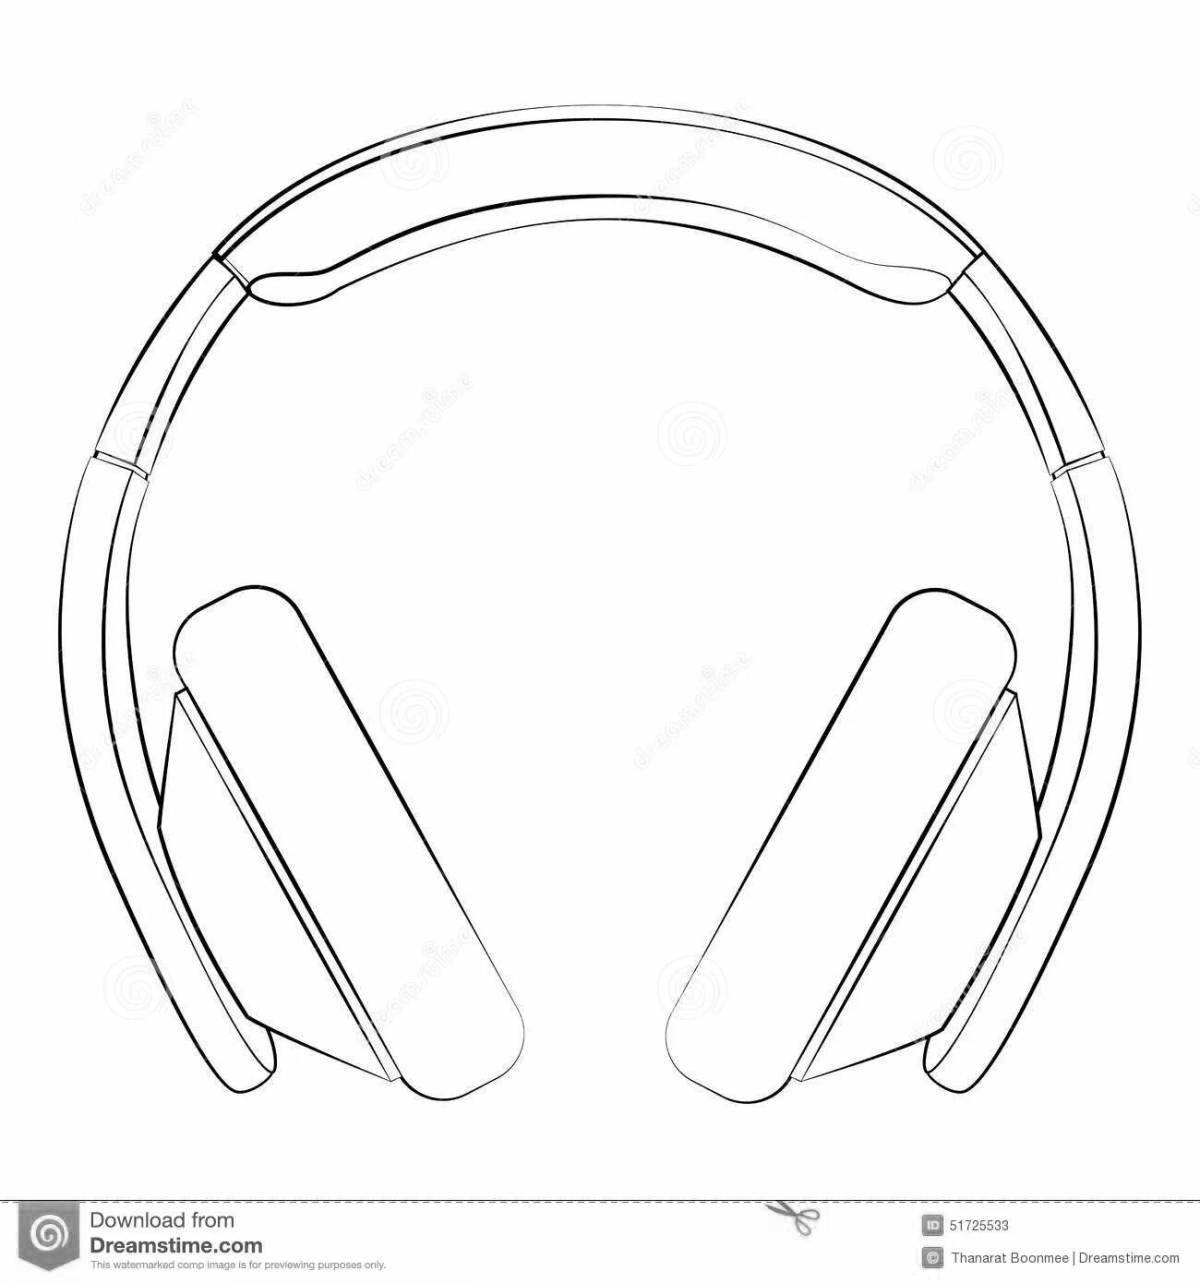 Coloring pages with headphones for toddlers